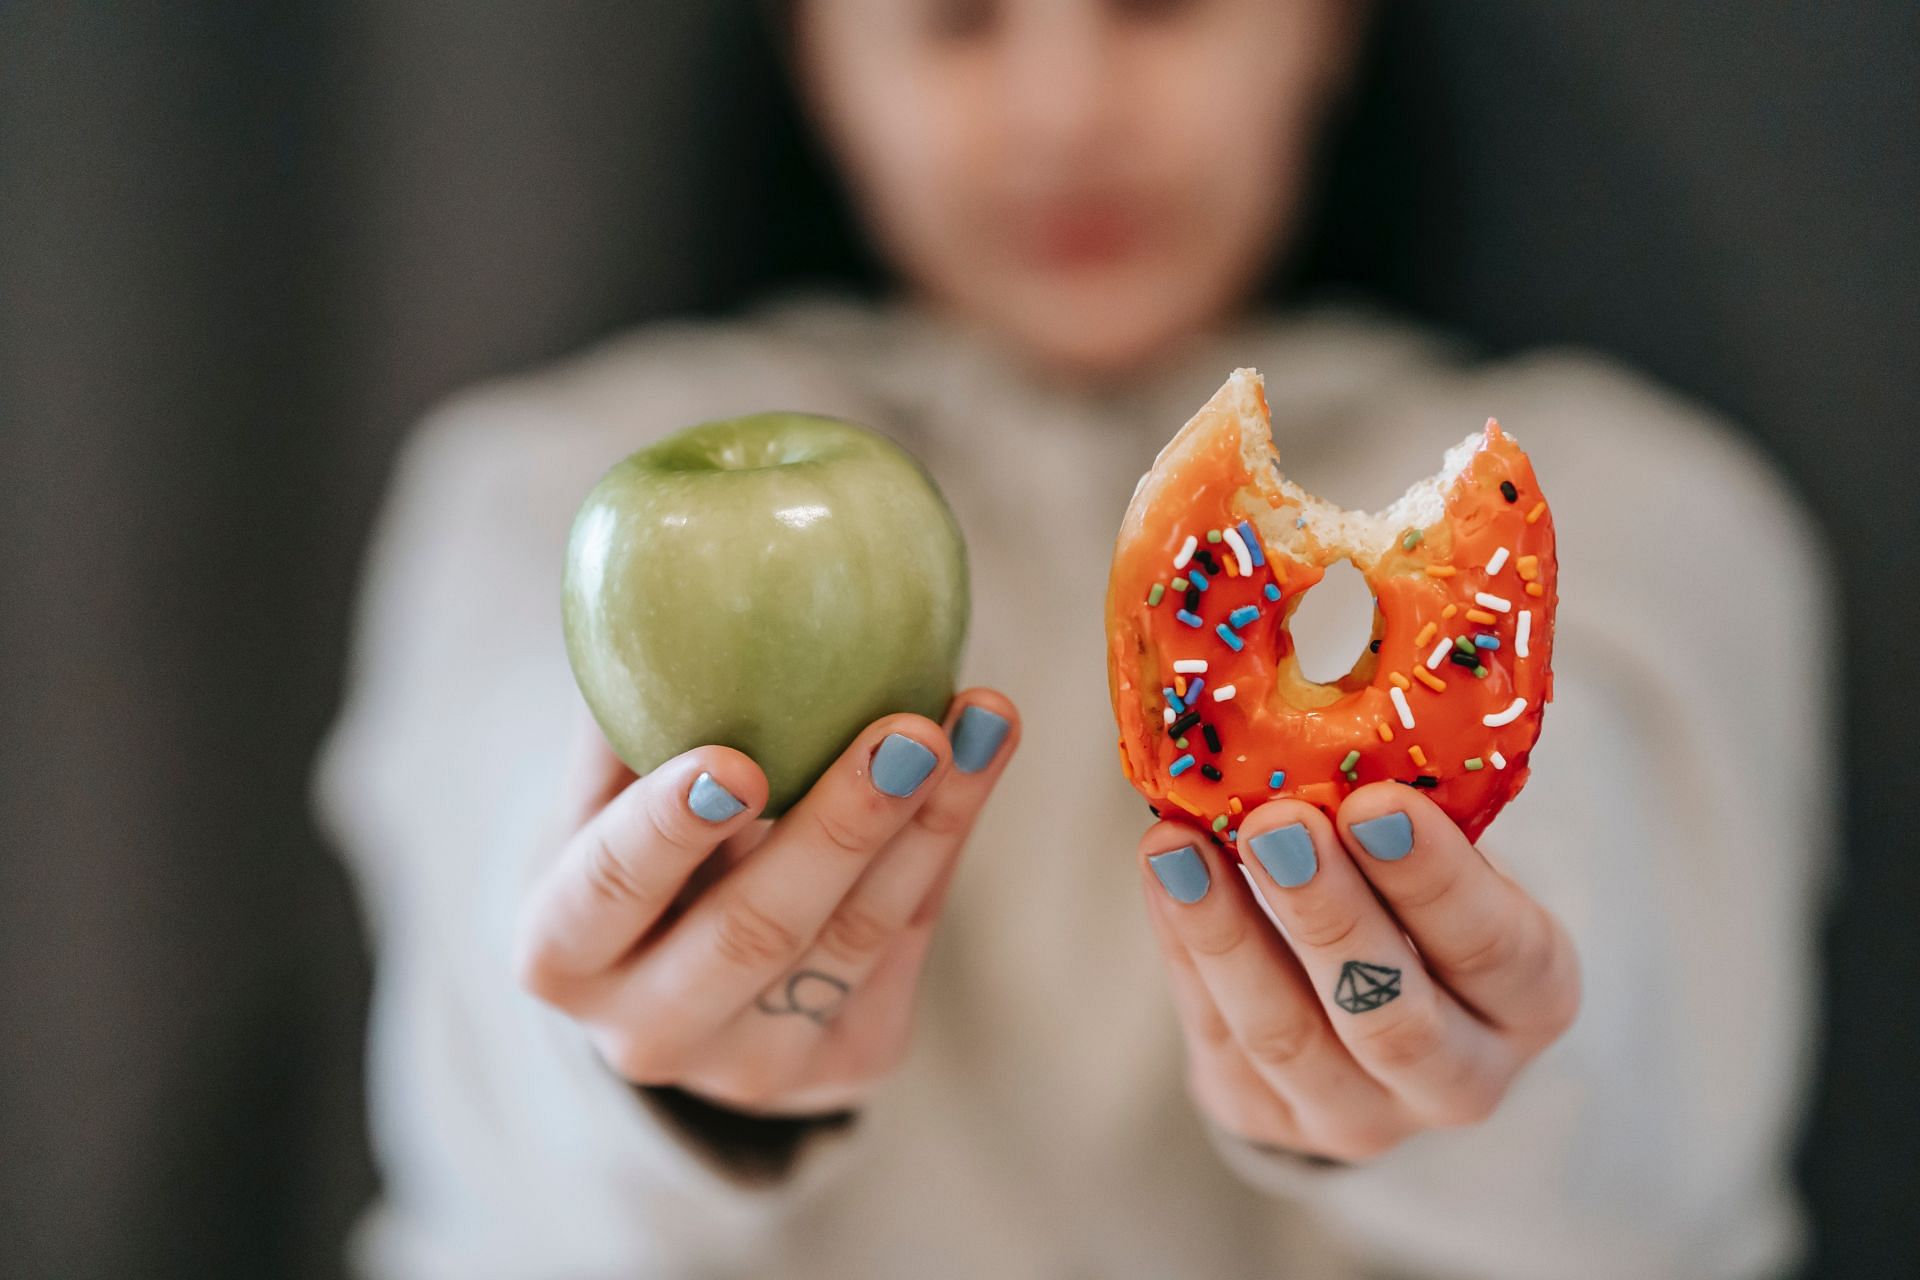 Consuming calories from unhealthy foods could mean not losing weight. (Image via Pexels/Andres Ayrton)